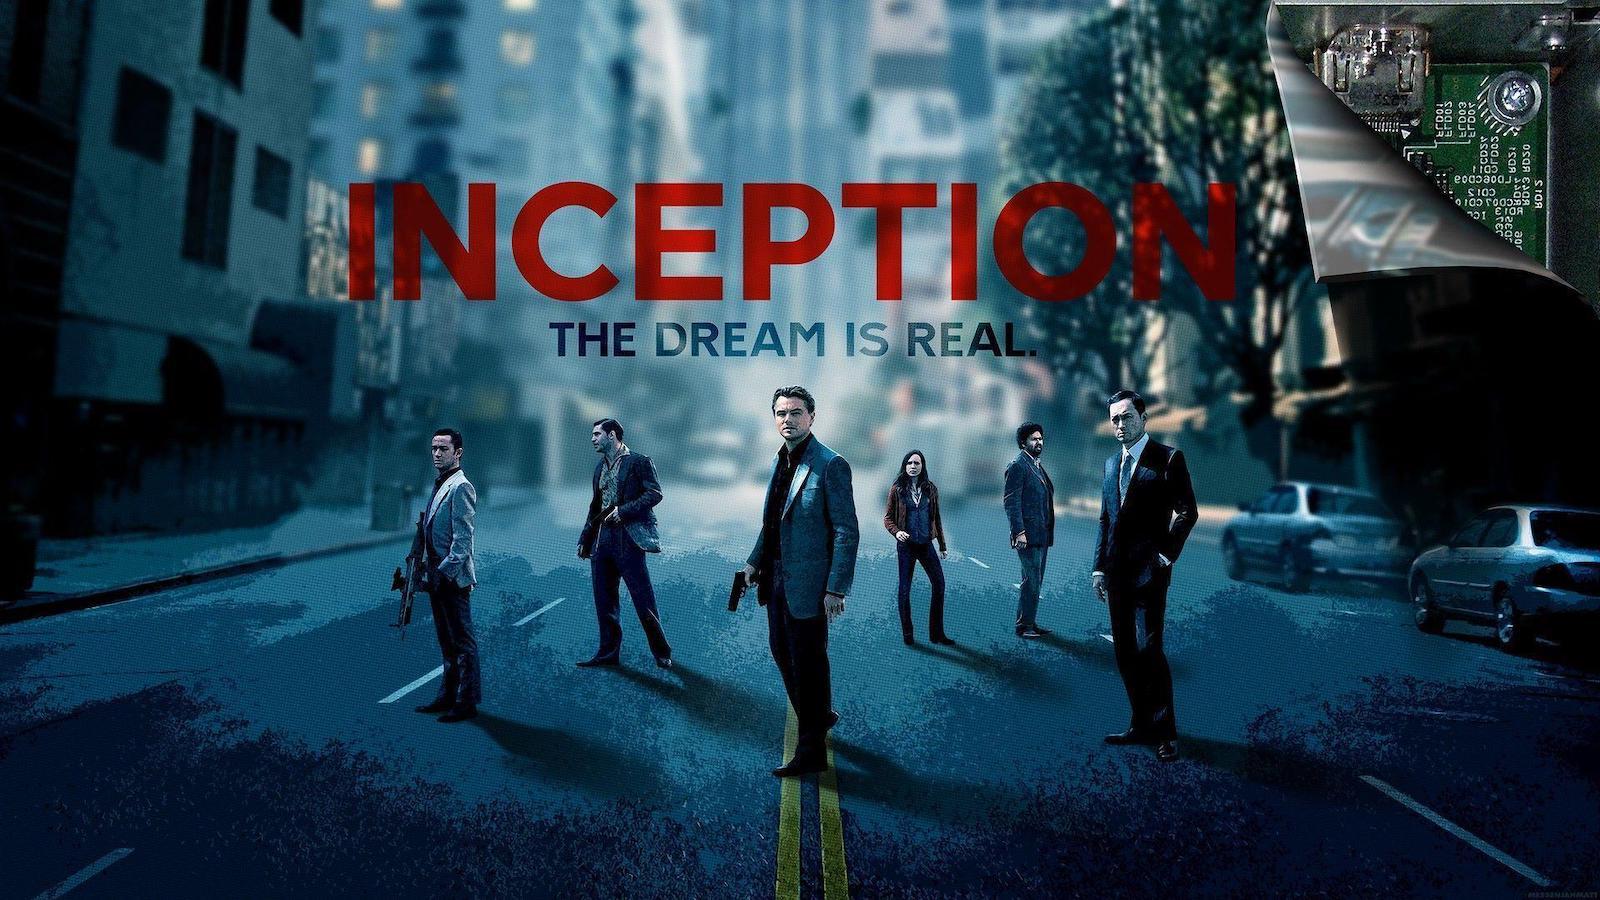 Inception Movie Poster - The Dream in Real